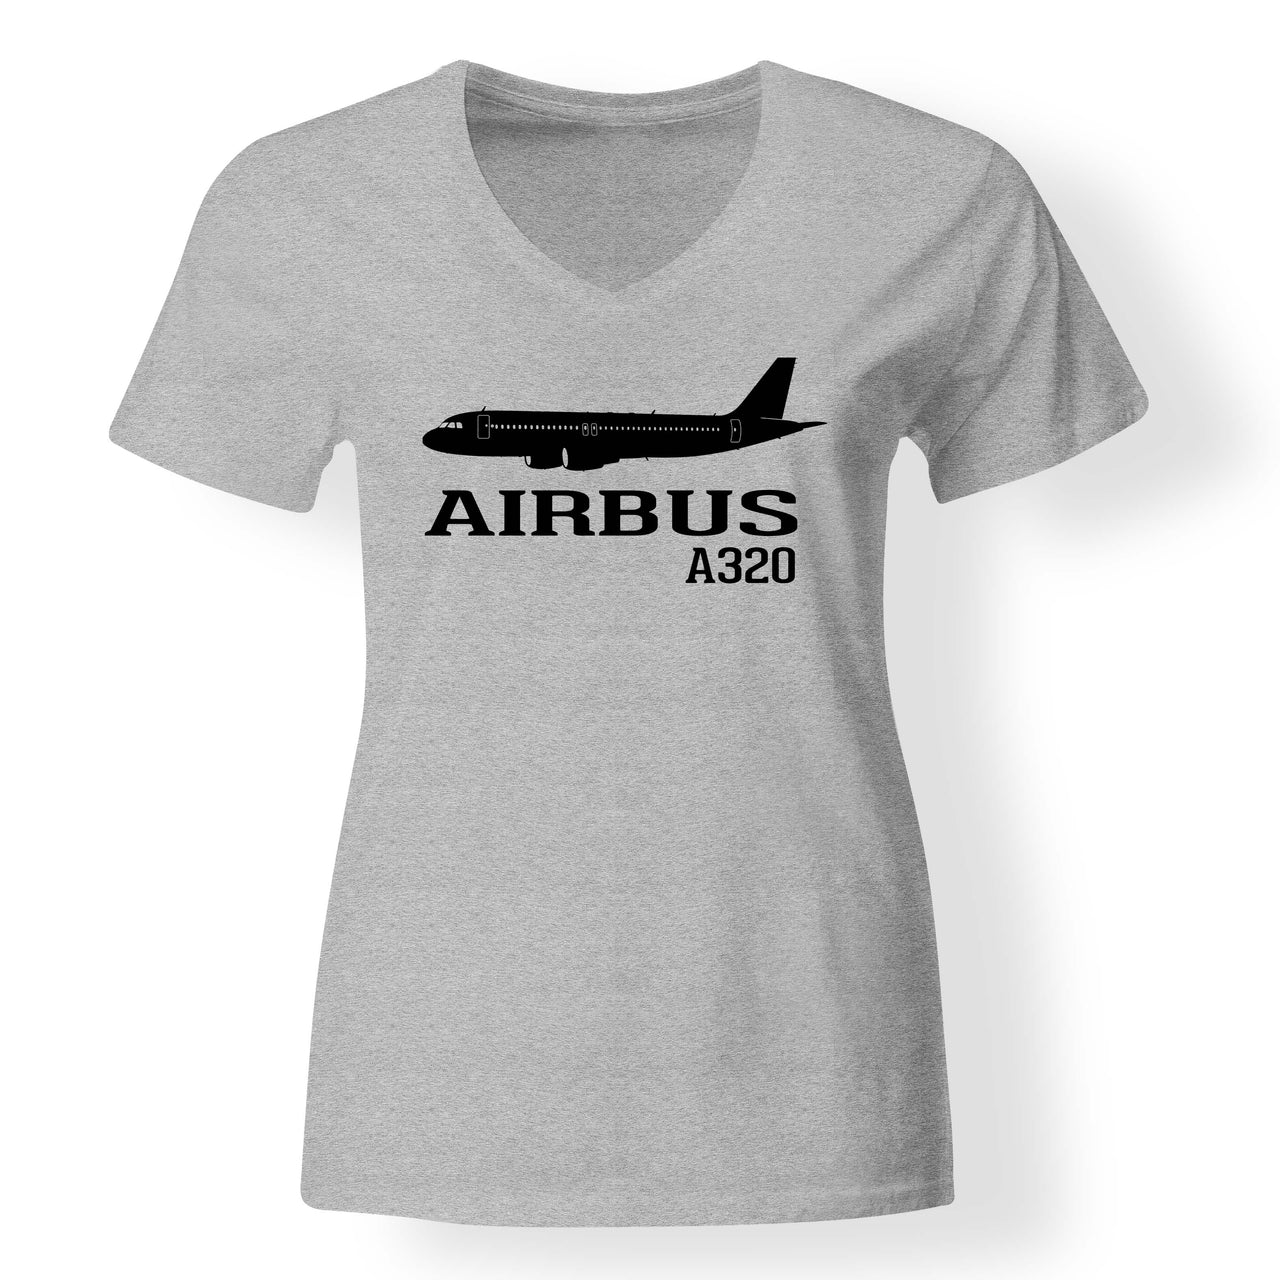 Airbus A320 Printed Designed V-Neck T-Shirts